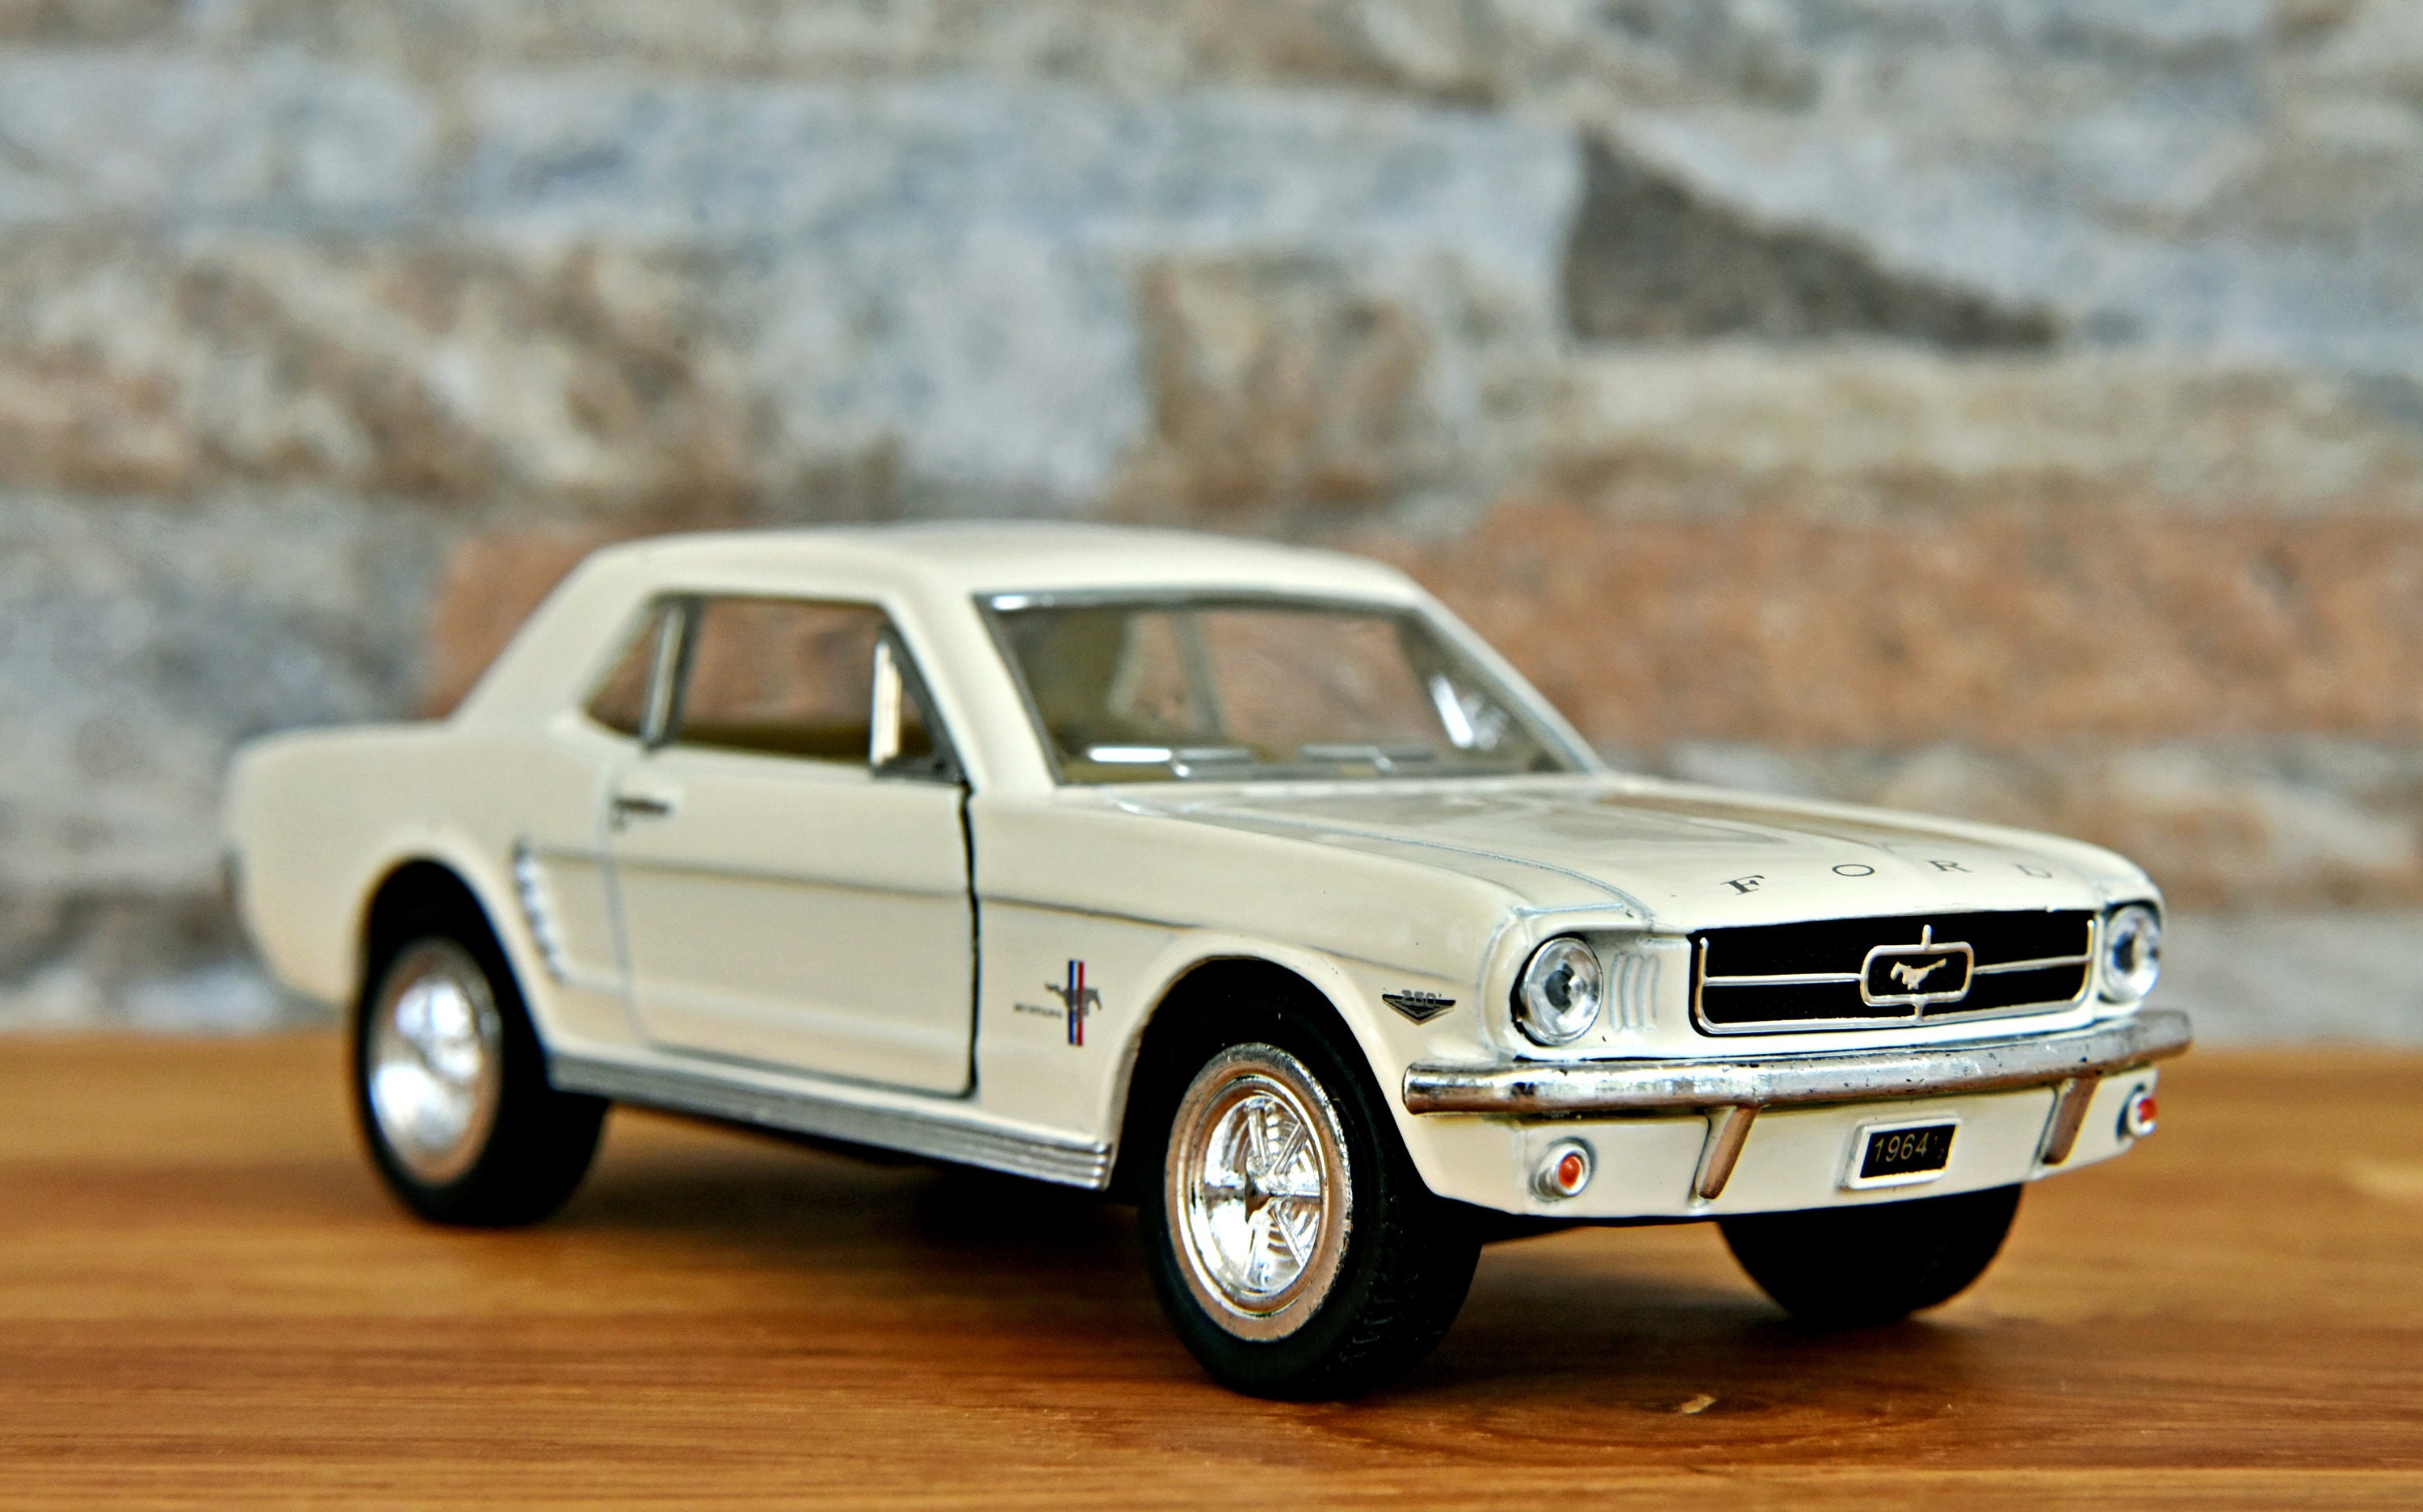 Maquette voiture : 1965 Ford Mustang 2+2 Fastback REVELL Pas Cher